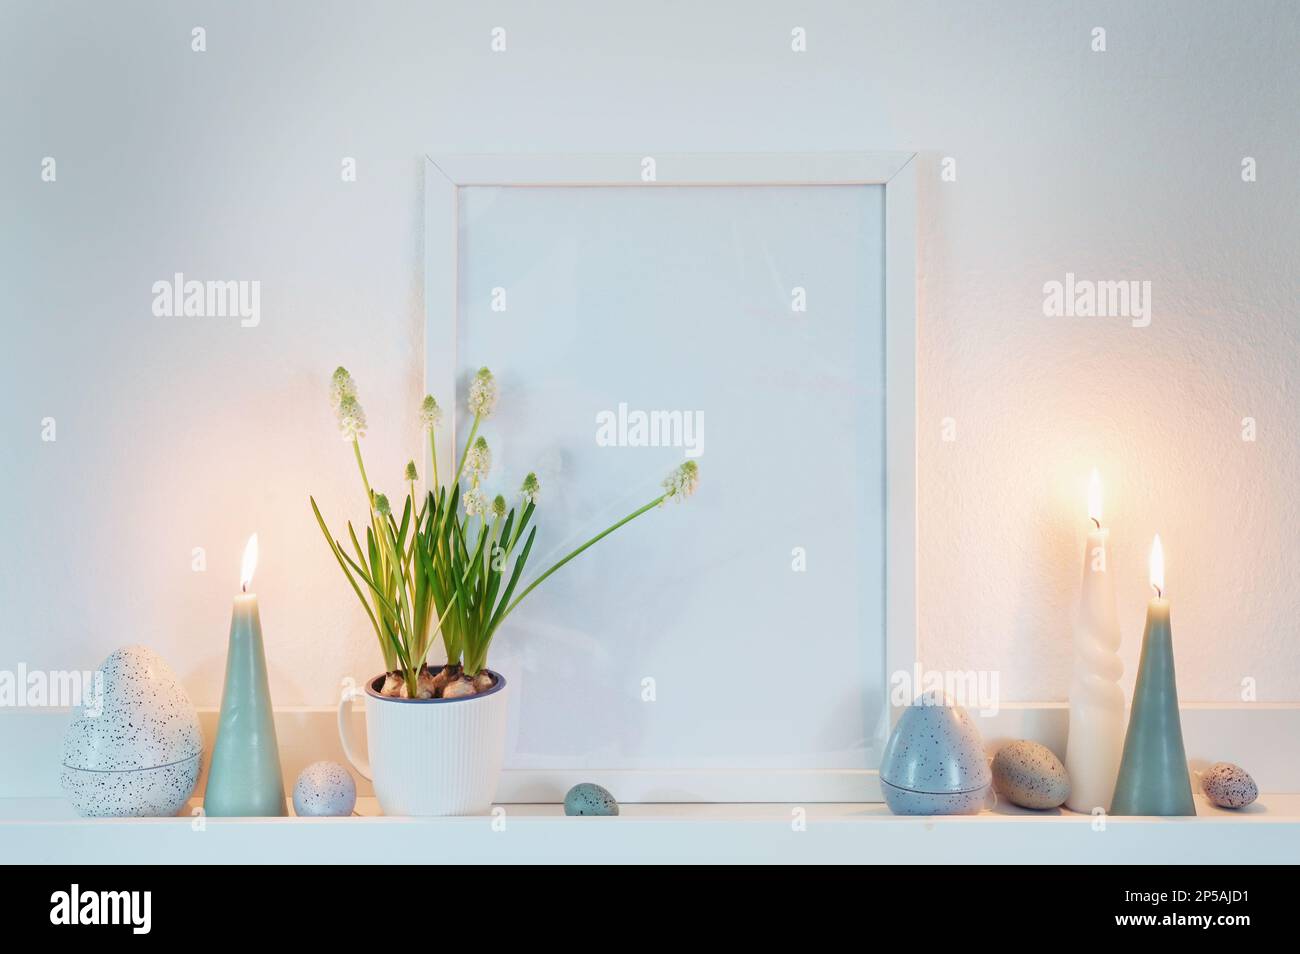 Decoration with an empty picture frame, candles and easter eggs in dusty blue green colors and a potted grape hyacinth plant on a white shelf on the w Stock Photo